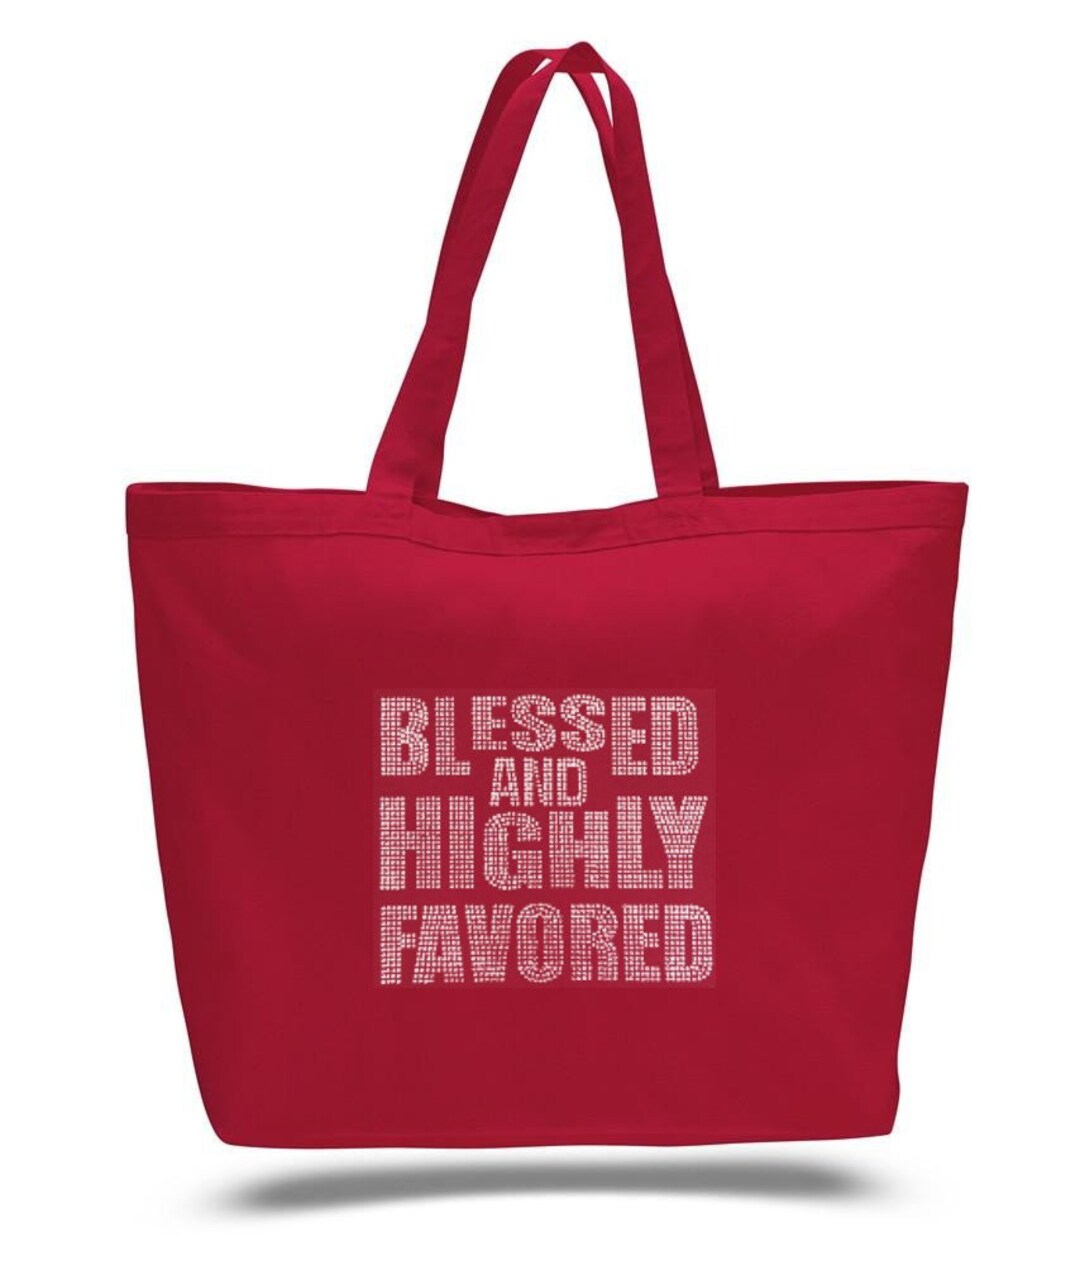 Rhinestone Handbag Blessed and Highly Favored Tote Bag - Etsy